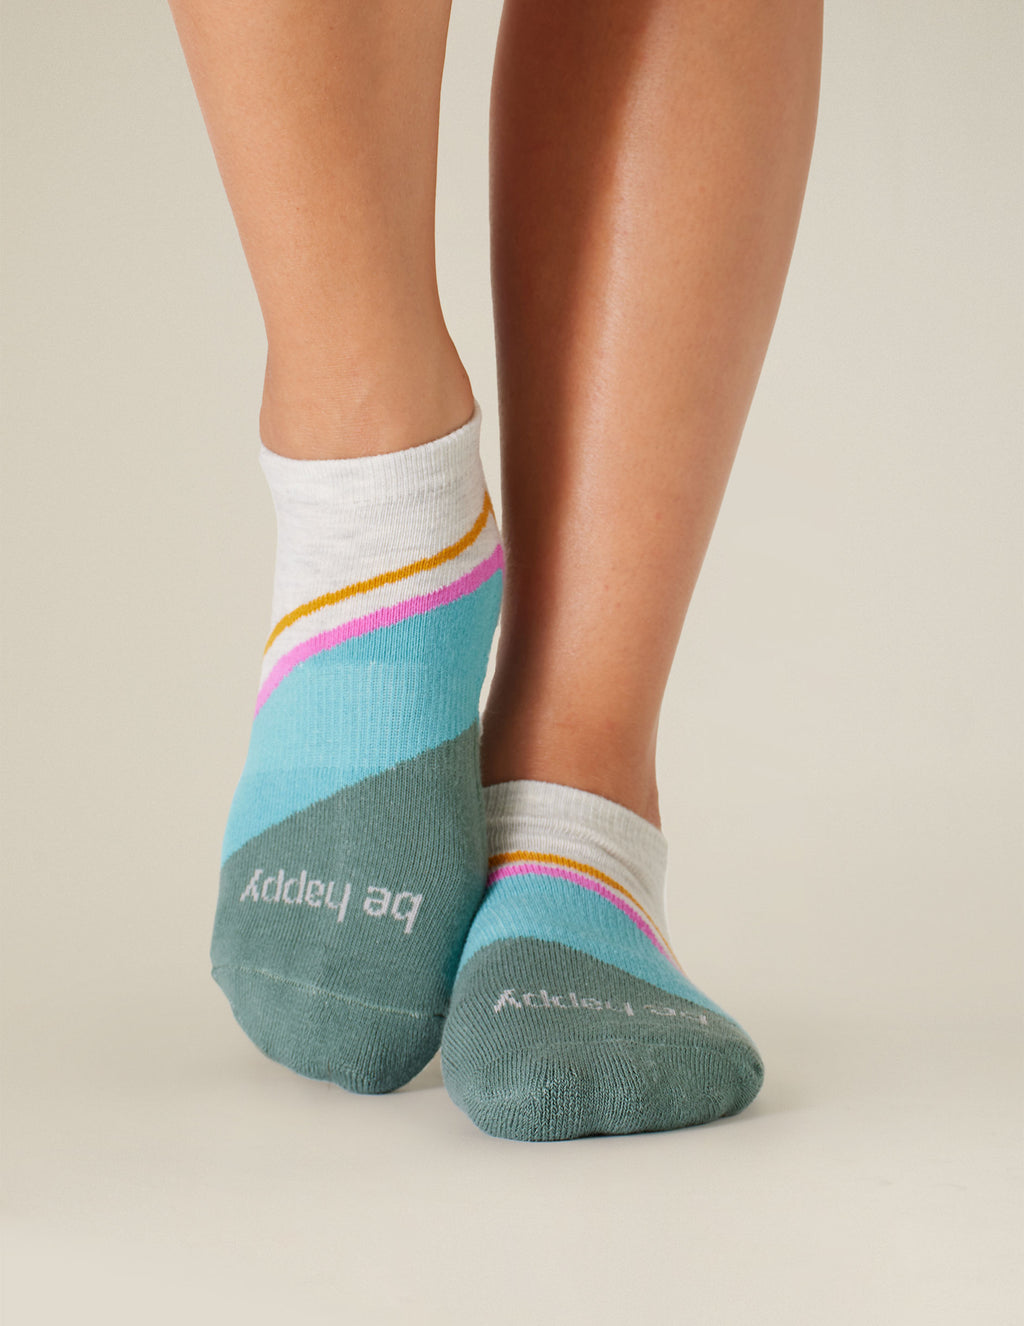 Sticky Be Happy Grip Socks Featured Image